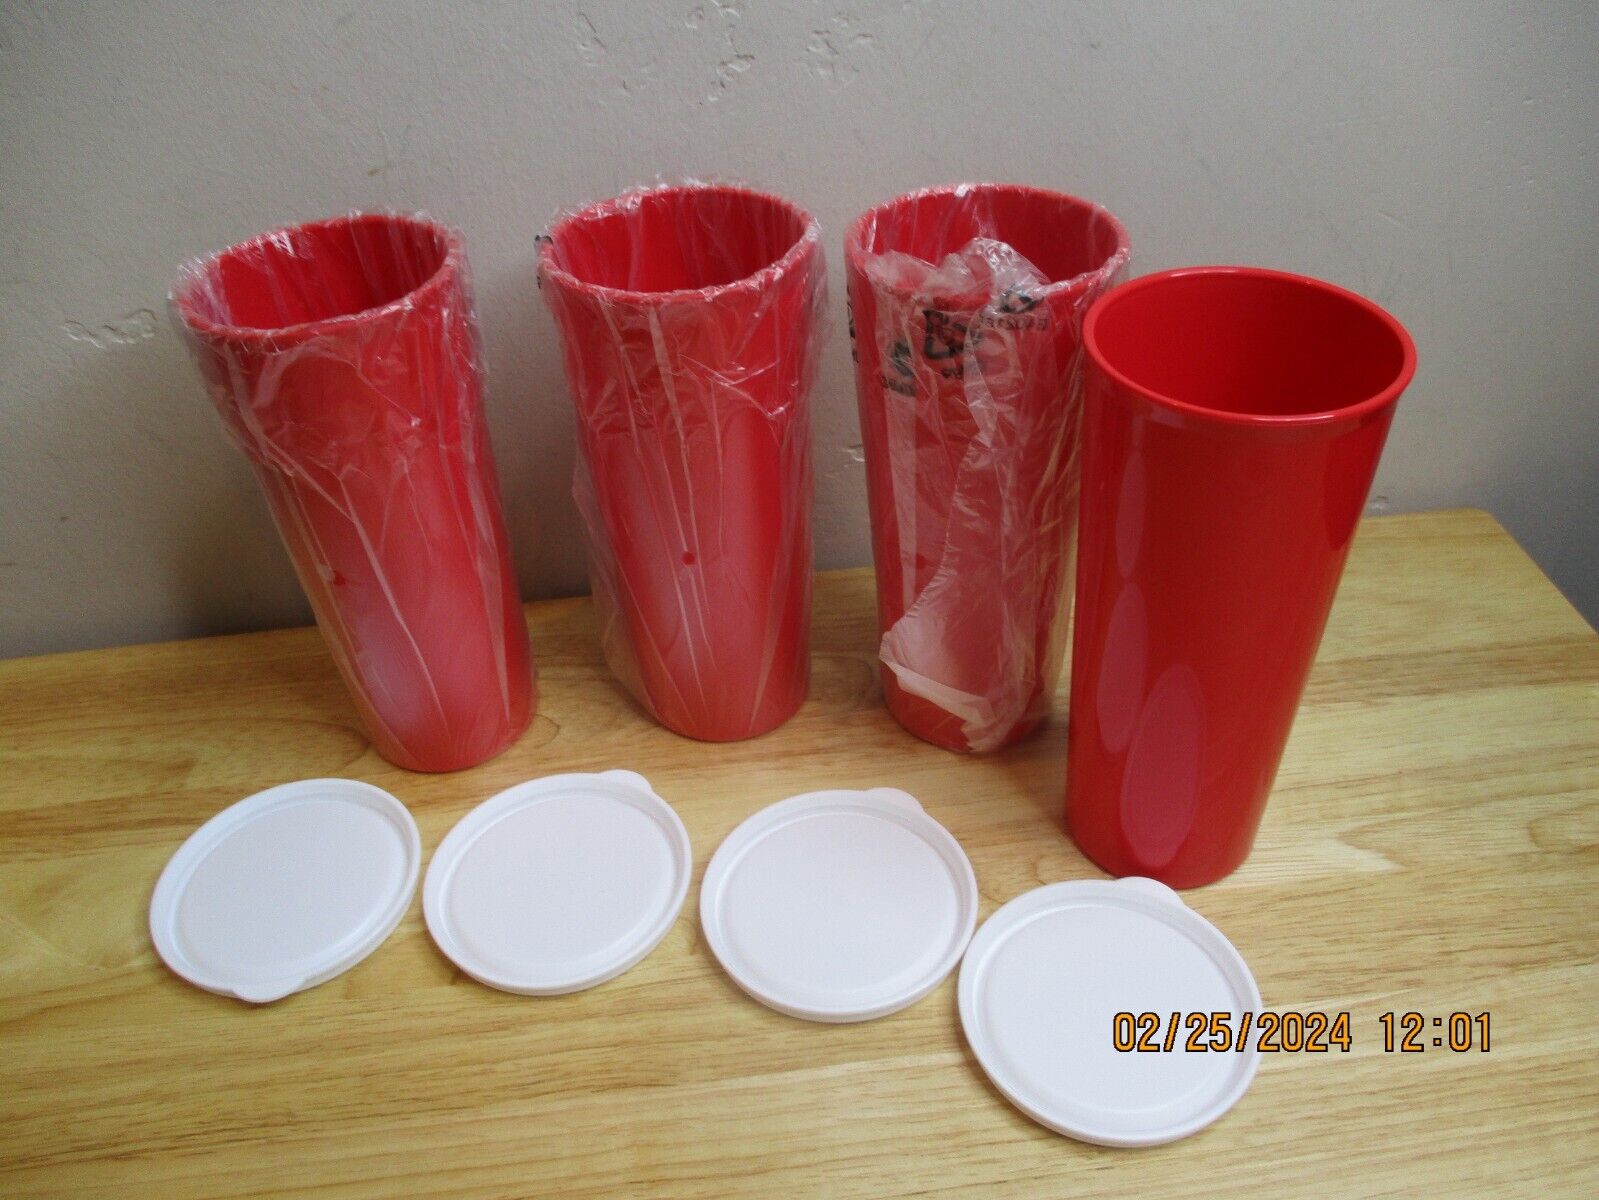 NEW- Red Tupperware 16 Oz Tumblers Set of 4 (5107A-1) 6.5” Tall-R11-A865